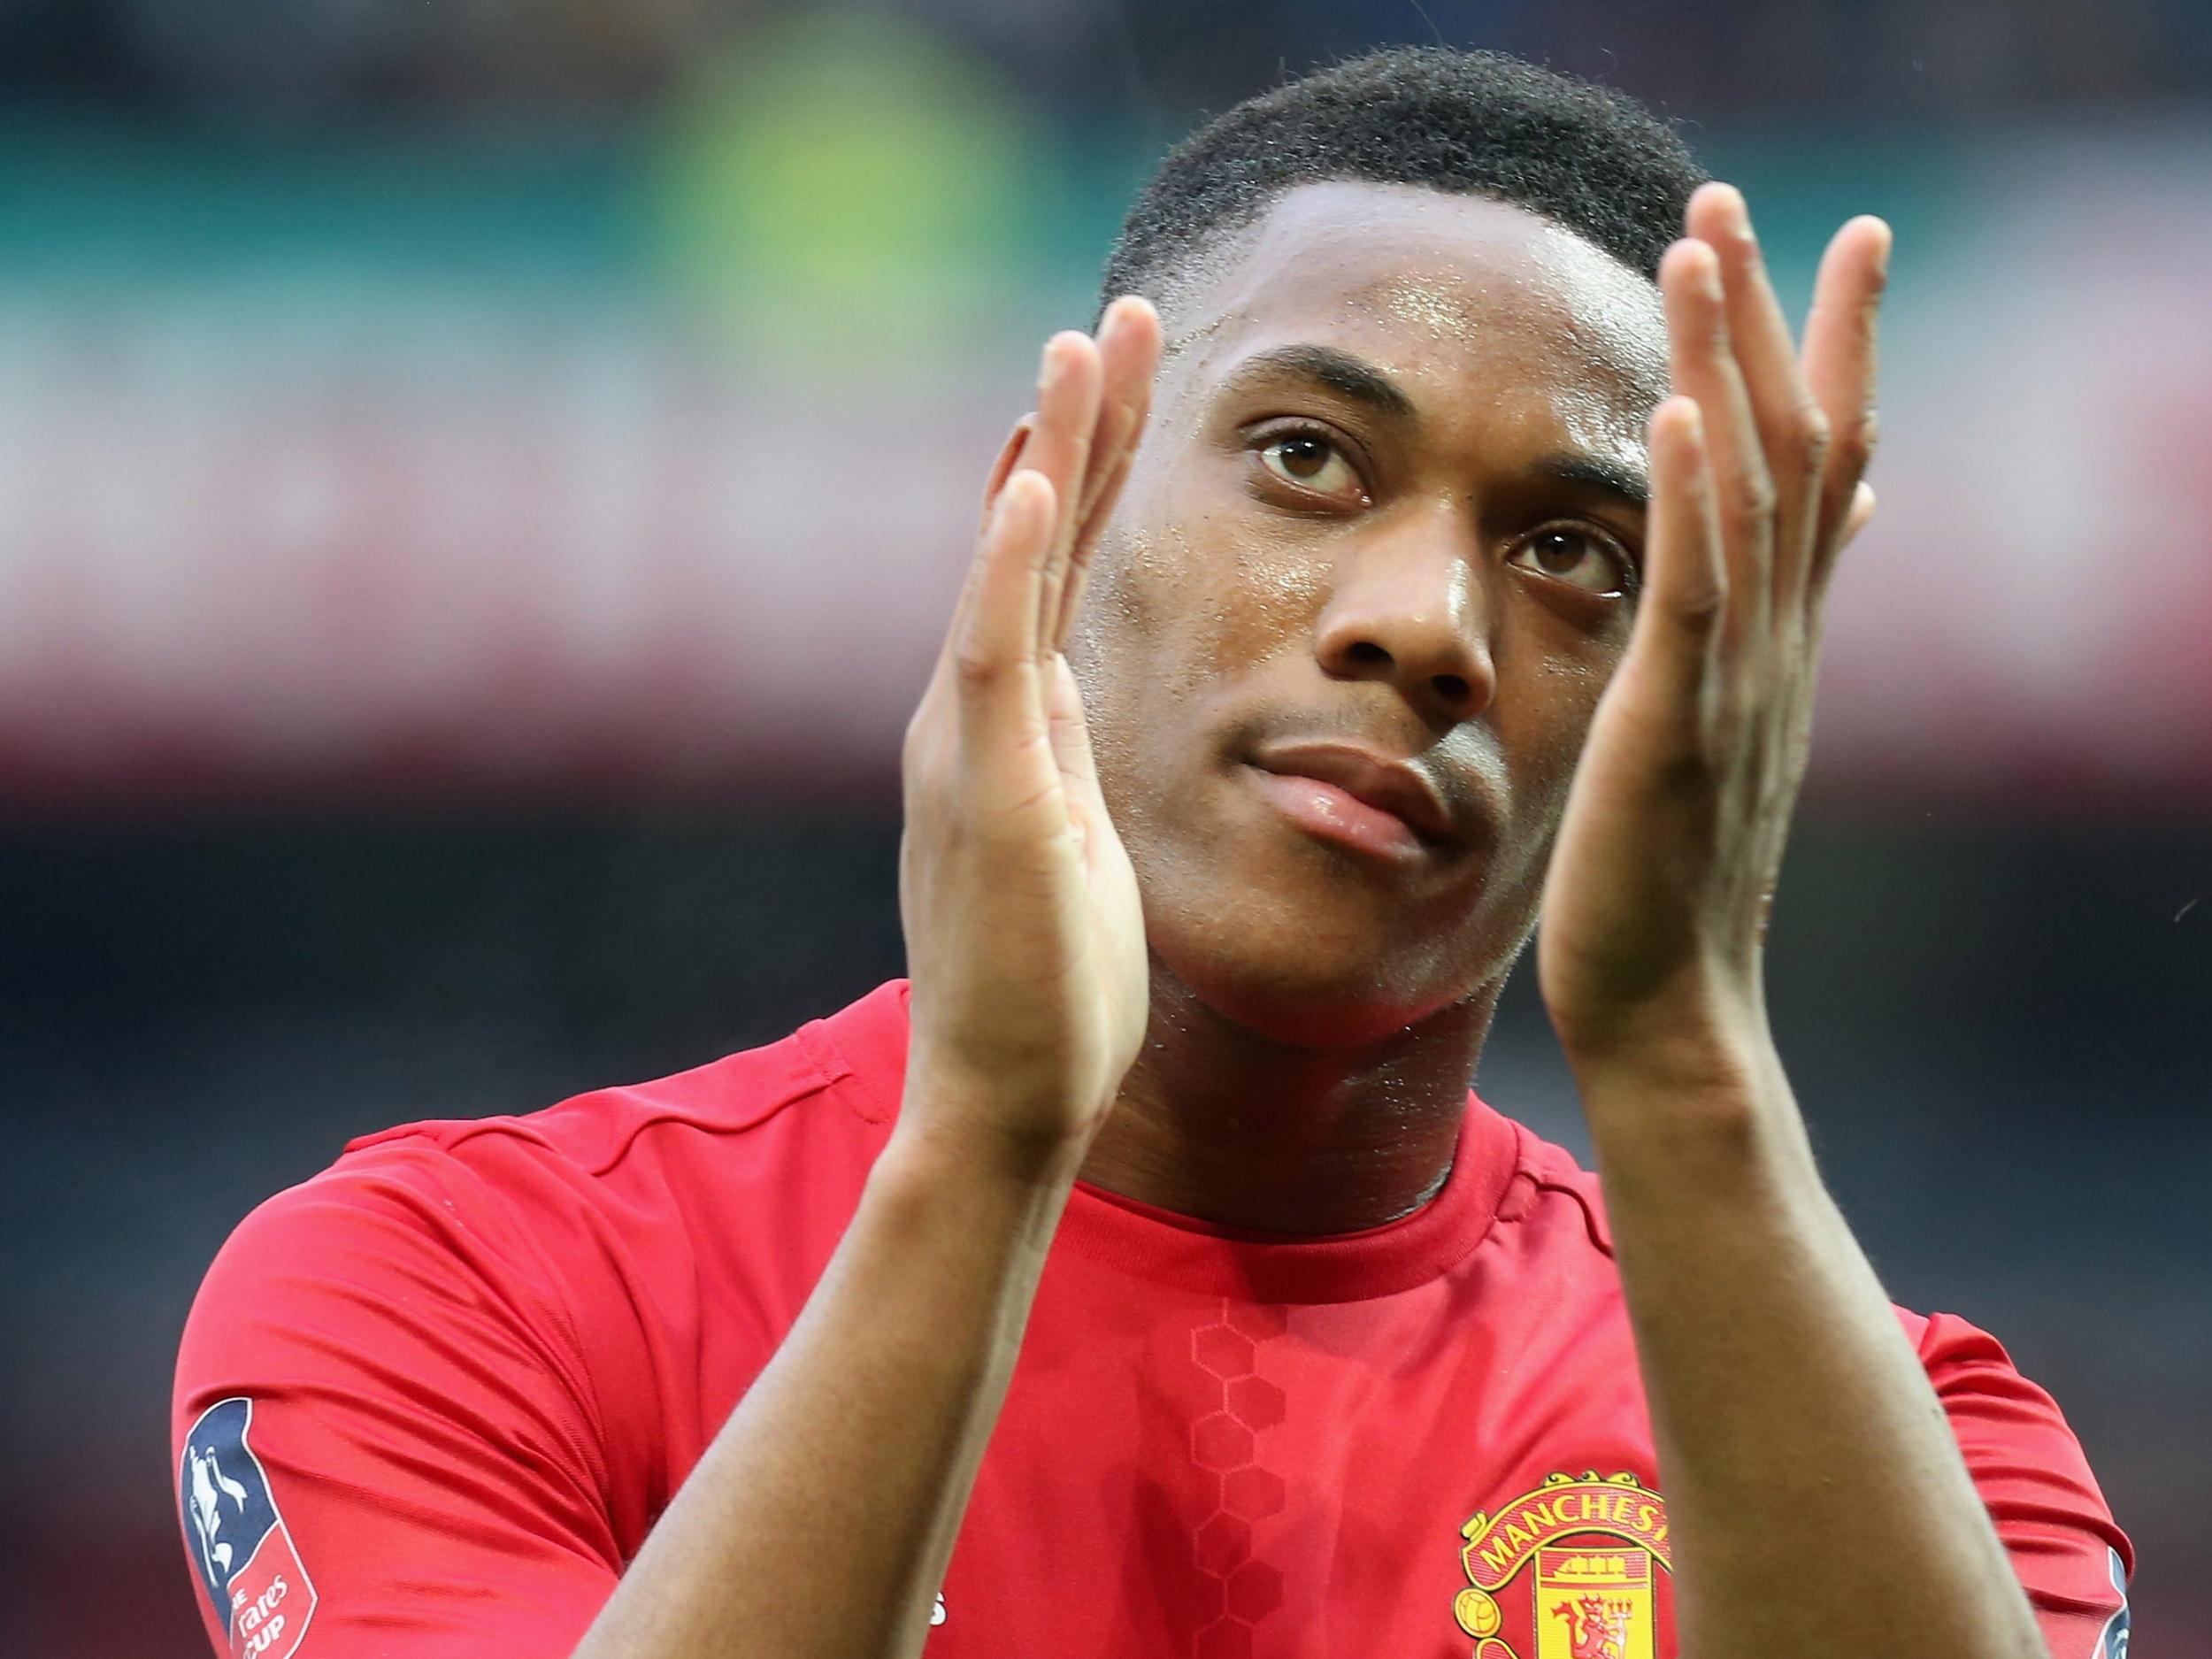 Martial has only managed six goals so far this season